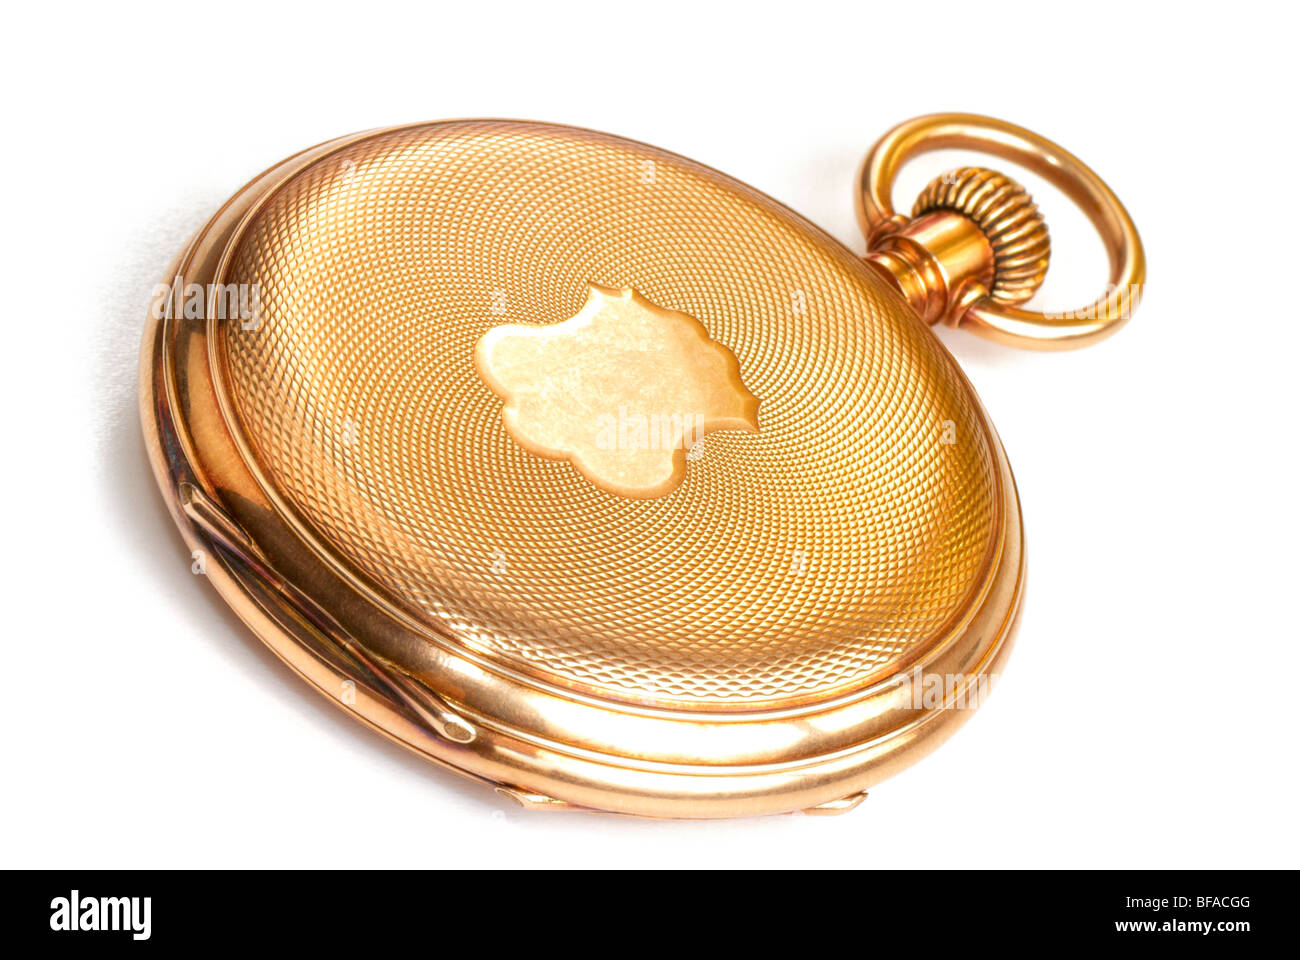 Golden pocket watch. Macro. On the white background with shadow. Stock Photo